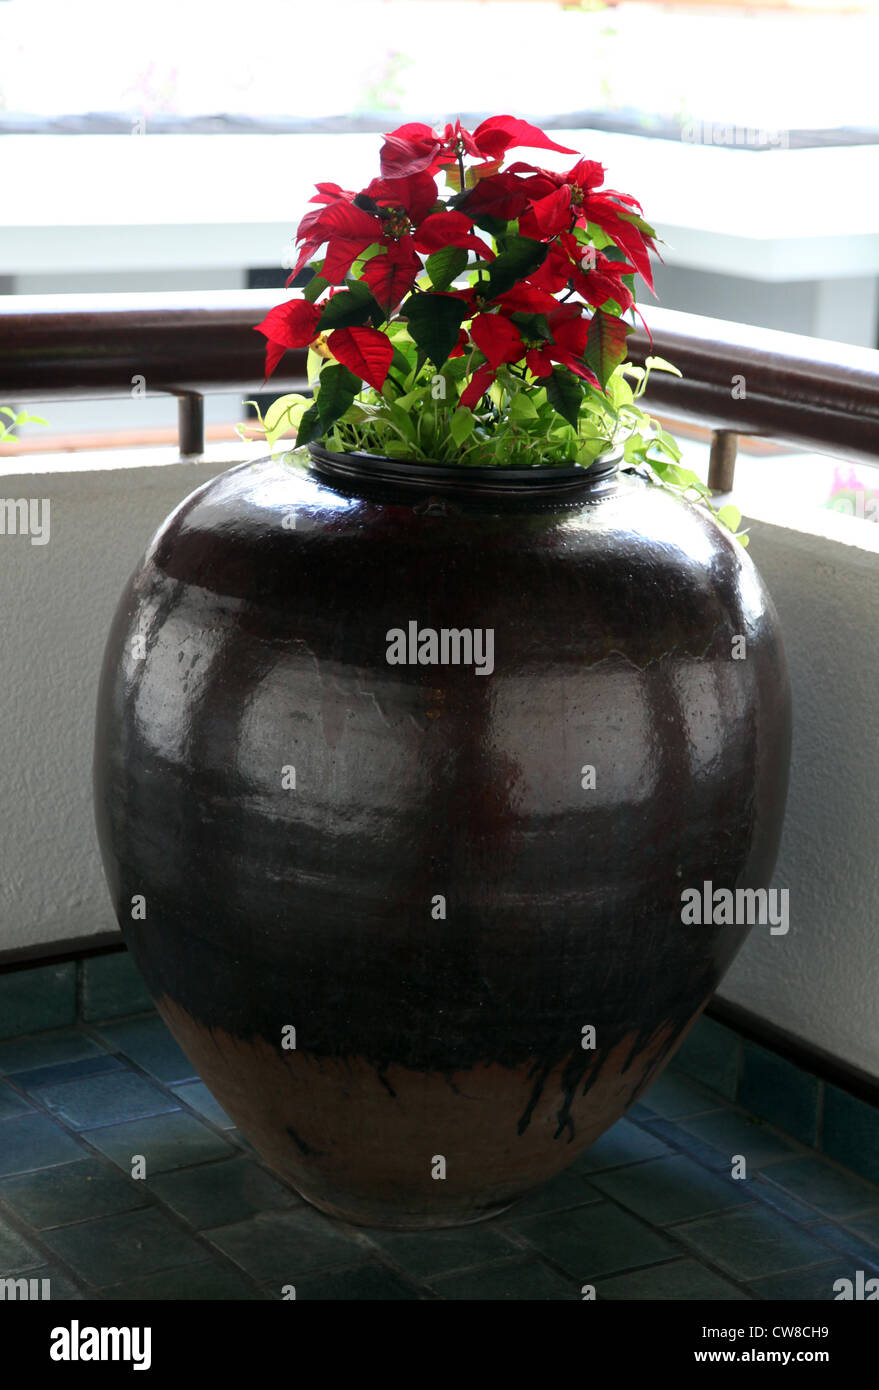 It S A Photo Of A Giant Pot Or Vase With Red Flowers In It Stock Photo Alamy,Sympathy Messages Loss Of A Sister Condolences